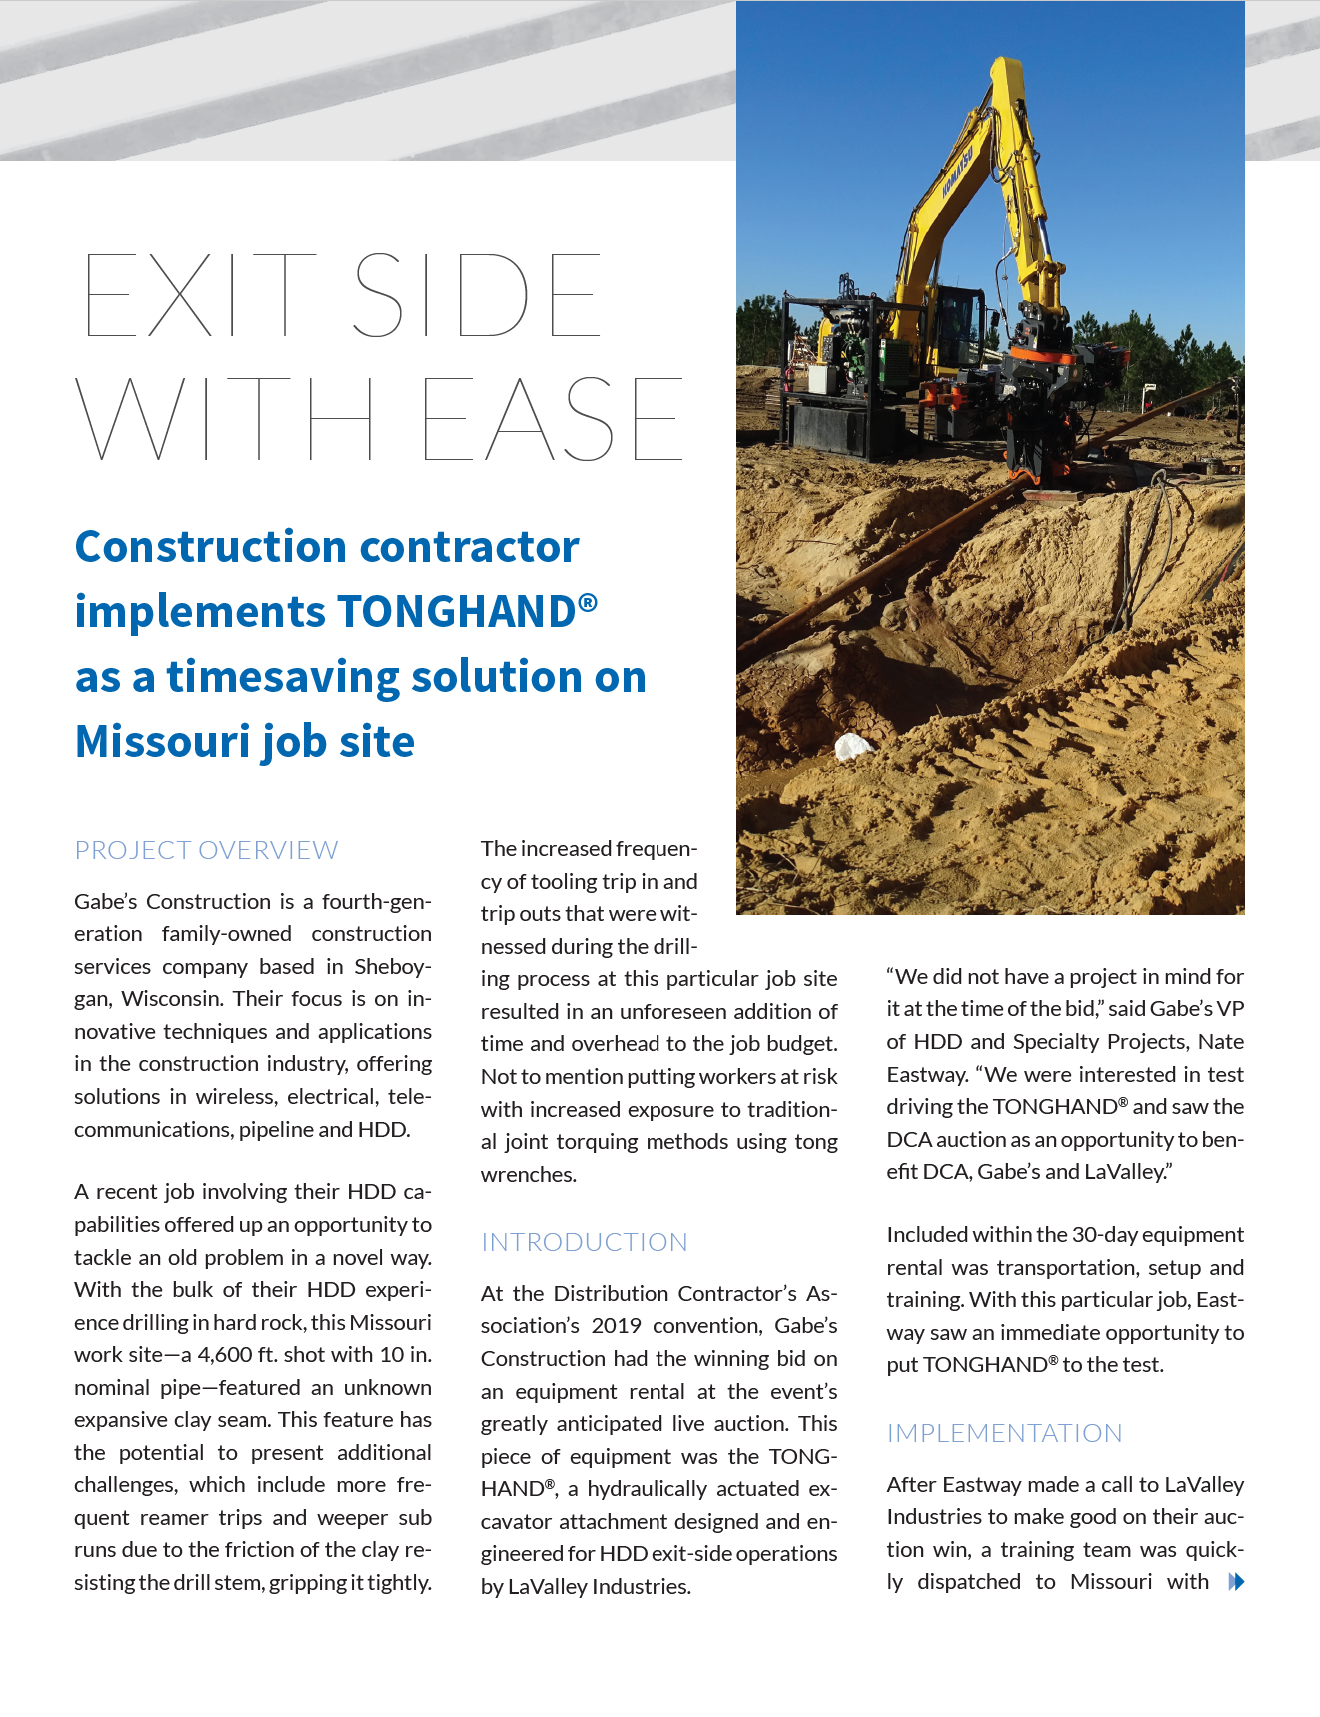 Case study cover image. Case study covers TONGHAND® exit-side wrench performance with Gabe's Construction, an HDD contractor.